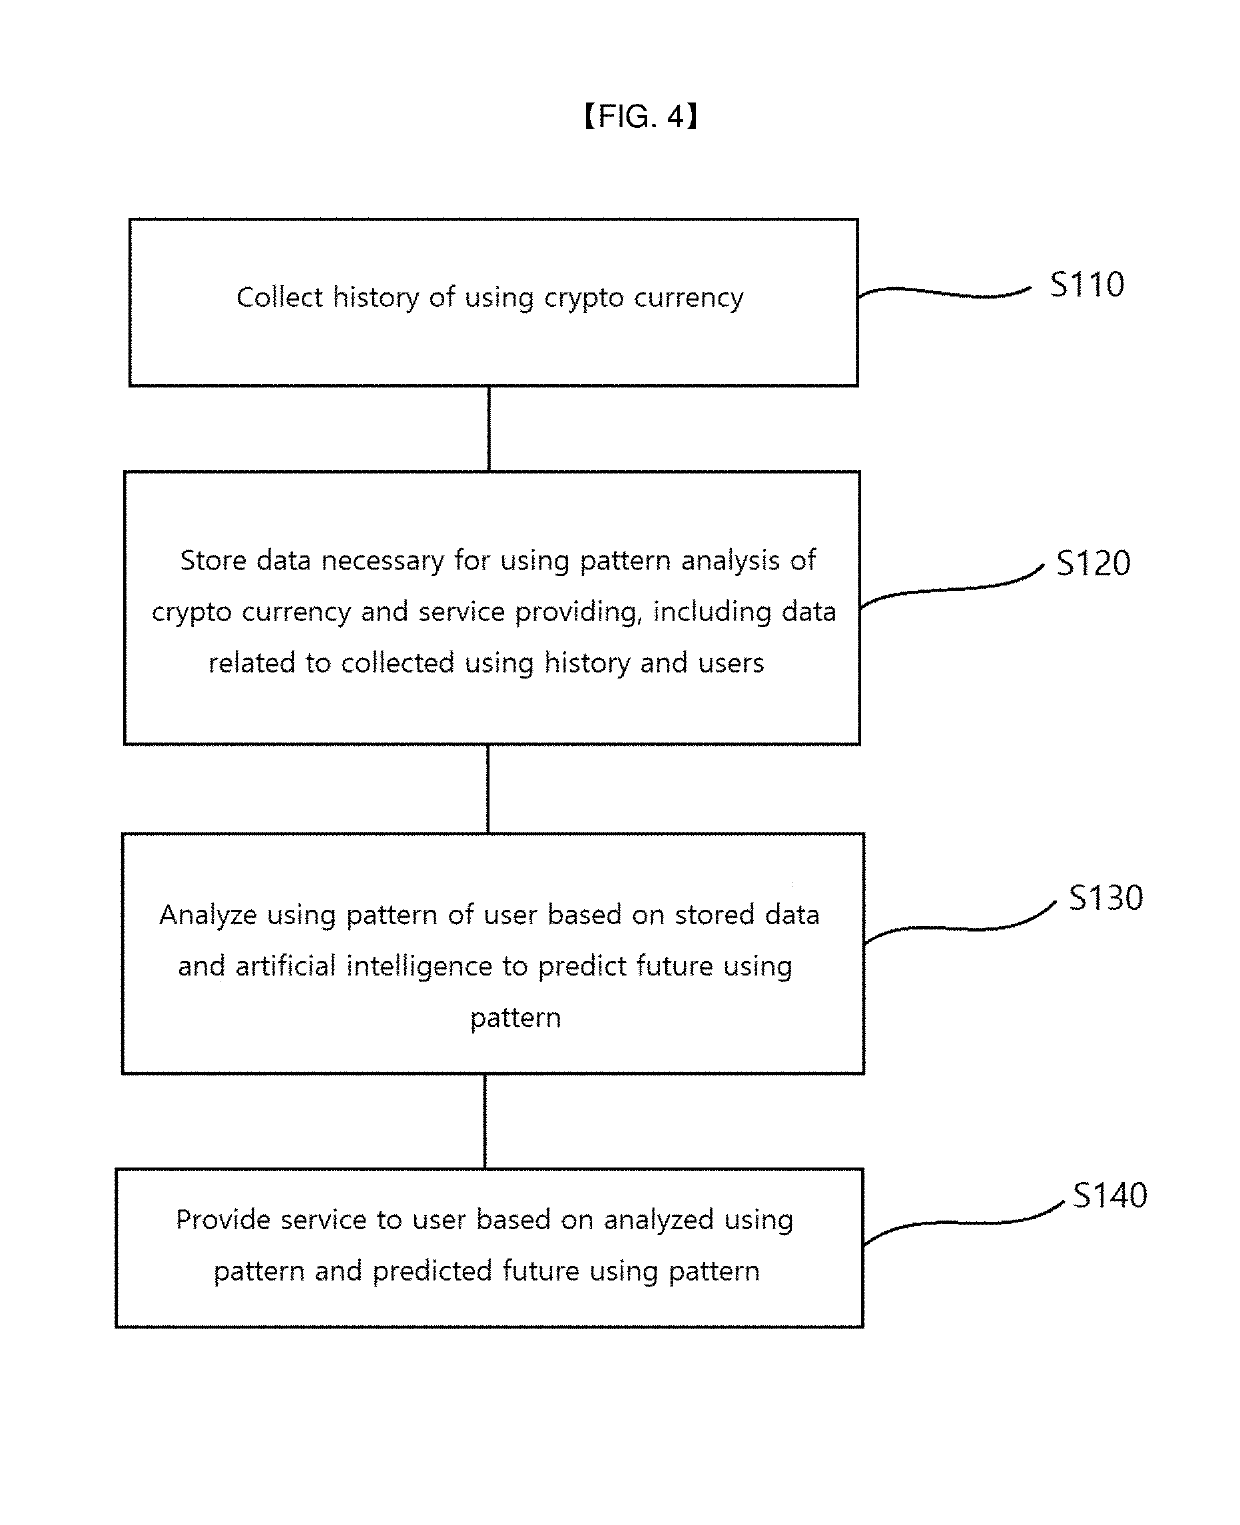 Apparatus and method for analyzing using pattern of crypto currency and providing service based on artificial intelligence